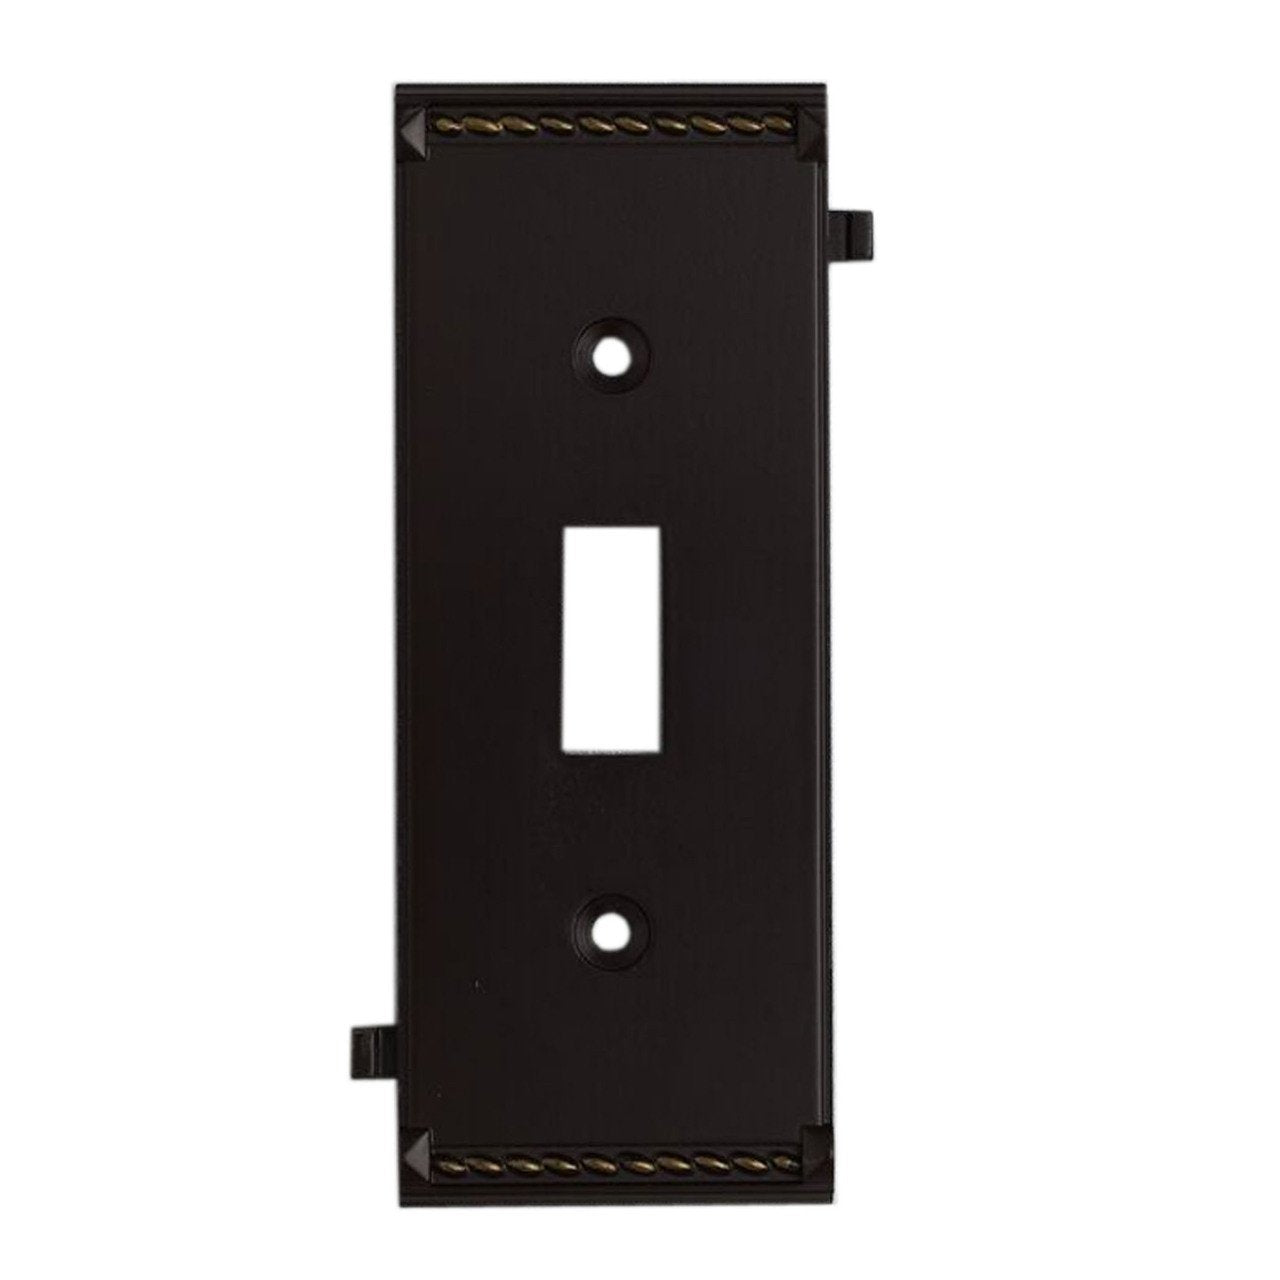 Elk Lighting, Inc. New Product ELK Lighting The Clickplates Middle Switch Plate In Aged Bronze 2504AGB Sold By VaasuHomes